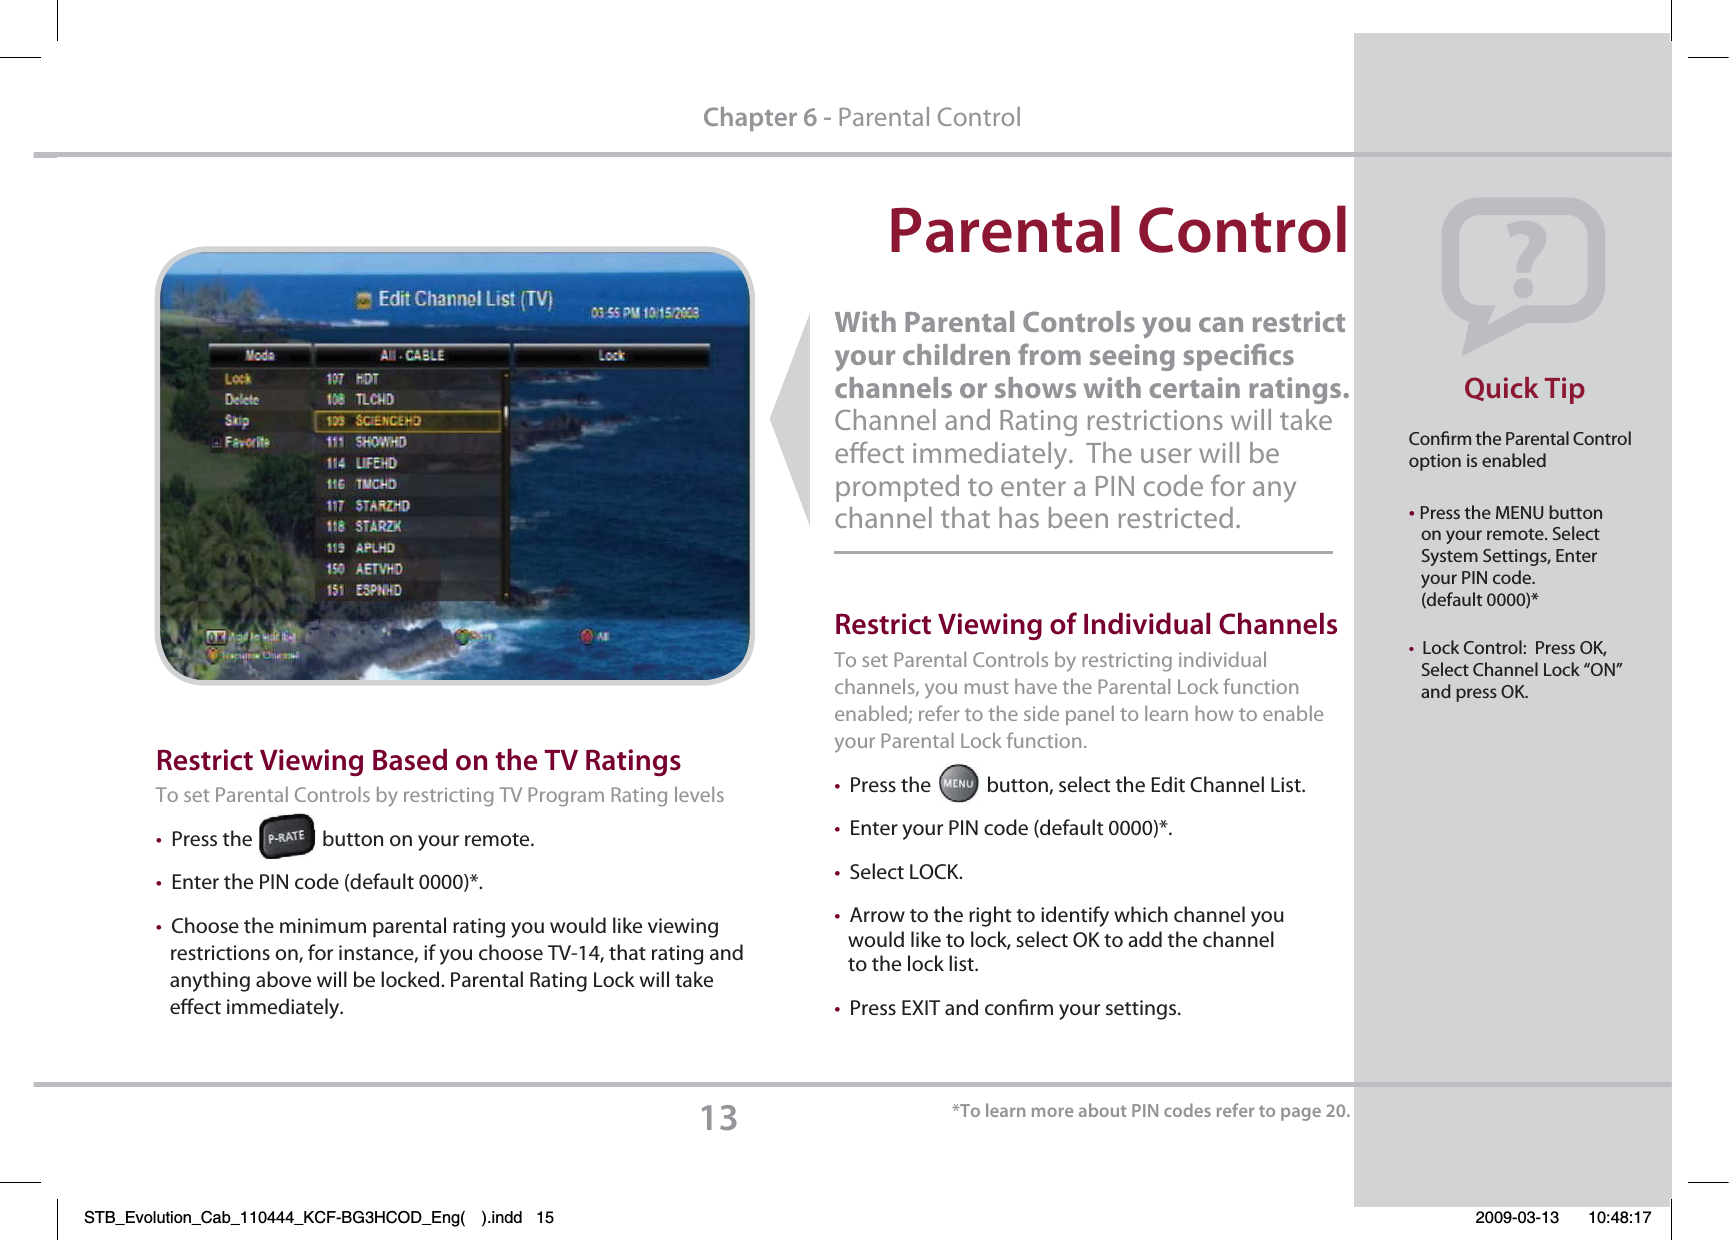 With Parental Controls you can restrict your children from seeing specics channels or shows with certain ratings.   Channel and Rating restrictions will take eect immediately.  The user will be prompted to enter a PIN code for any channel that has been restricted.  1BSFOUBM$POUSPMQuick Tip133FTUSJDU7JFXJOH#BTFEPOUIF573BUJOHTTo set Parental Controls by restricting TV Program Rating levels tPress the               button on your remote.tEnter the PIN code (default 0000)*.tChoose the minimum parental rating you would like viewing   restrictions on, for instance, if you choose TV-14, that rating and    anything above will be locked. Parental Rating Lock will take    eect immediately.$IBQUFSParental ControlConrm the Parental Control option is enabled tPress the MENU button   on your remote. Select    System Settings, Enter    your PIN code.   (default 0000)* tLock Control:  Press OK,          Select Channel Lock “ON”    and press OK.3FTUSJDU7JFXJOHPG*OEJWJEVBM$IBOOFMTTo set Parental Controls by restricting individual channels, you must have the Parental Lock function enabled; refer to the side panel to learn how to enable your Parental Lock function.tPress the            button, select the Edit Channel List. tEnter your PIN code (default 0000)*. tSelect LOCK.tArrow to the right to identify which channel you    would like to lock, select OK to add the channel    to the lock list.tPress EXIT and conrm your settings.  5PMFBSONPSFBCPVU1*/DPEFTSFGFSUPQBHFSTB_Evolution_Cab_110444_KCF-BG3HCOD_Eng( ).indd   15 2009-03-13     10:48:17